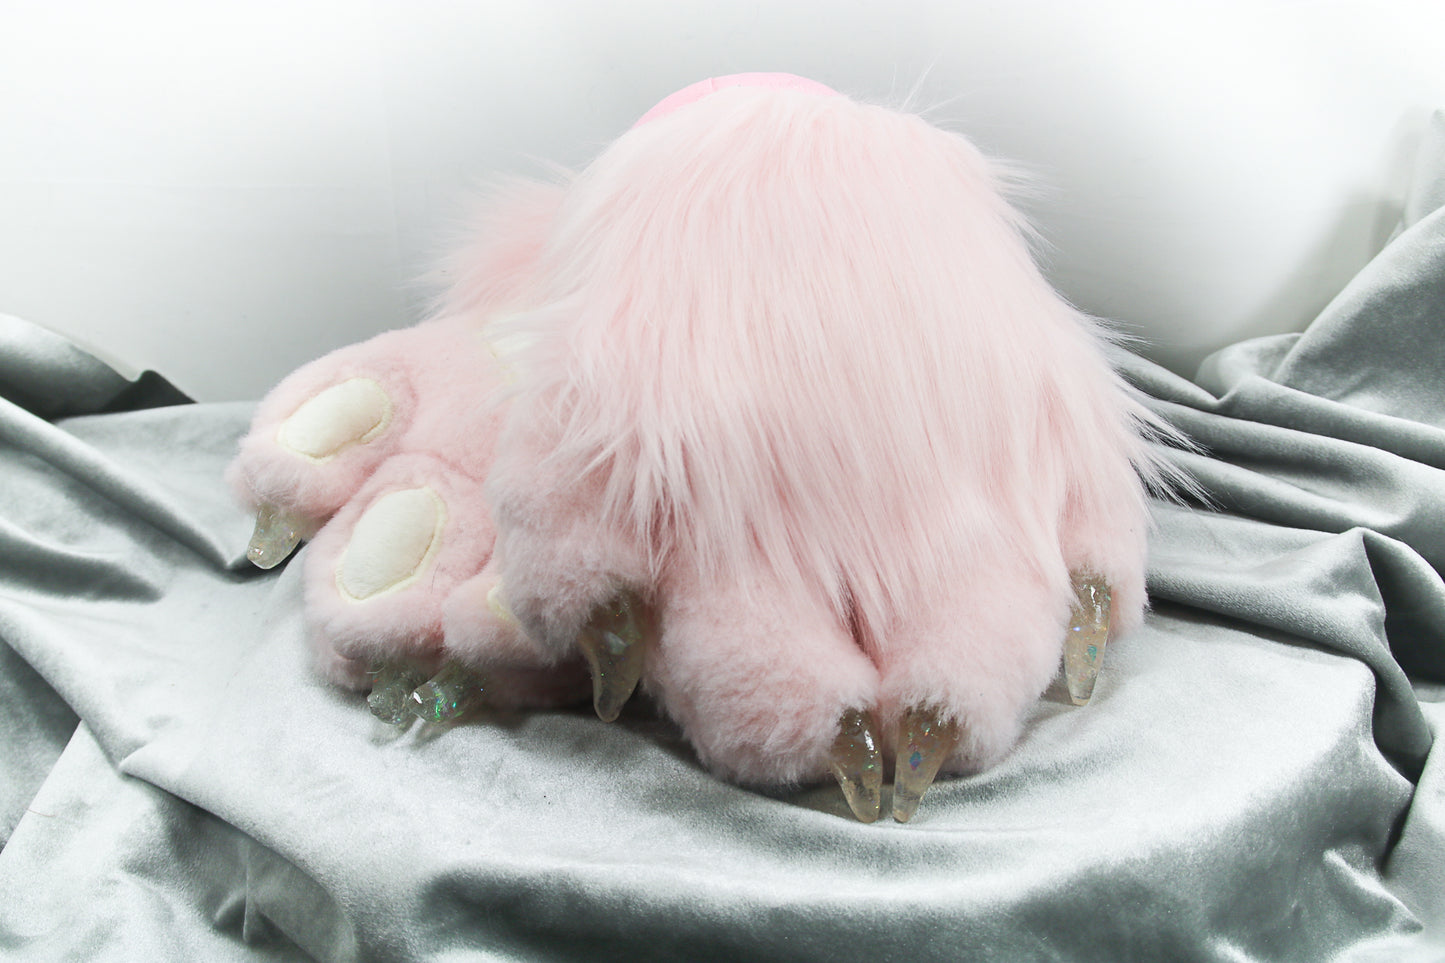 Pink and Cream Faux Fur Cat Paw Gloves with Resin Claws